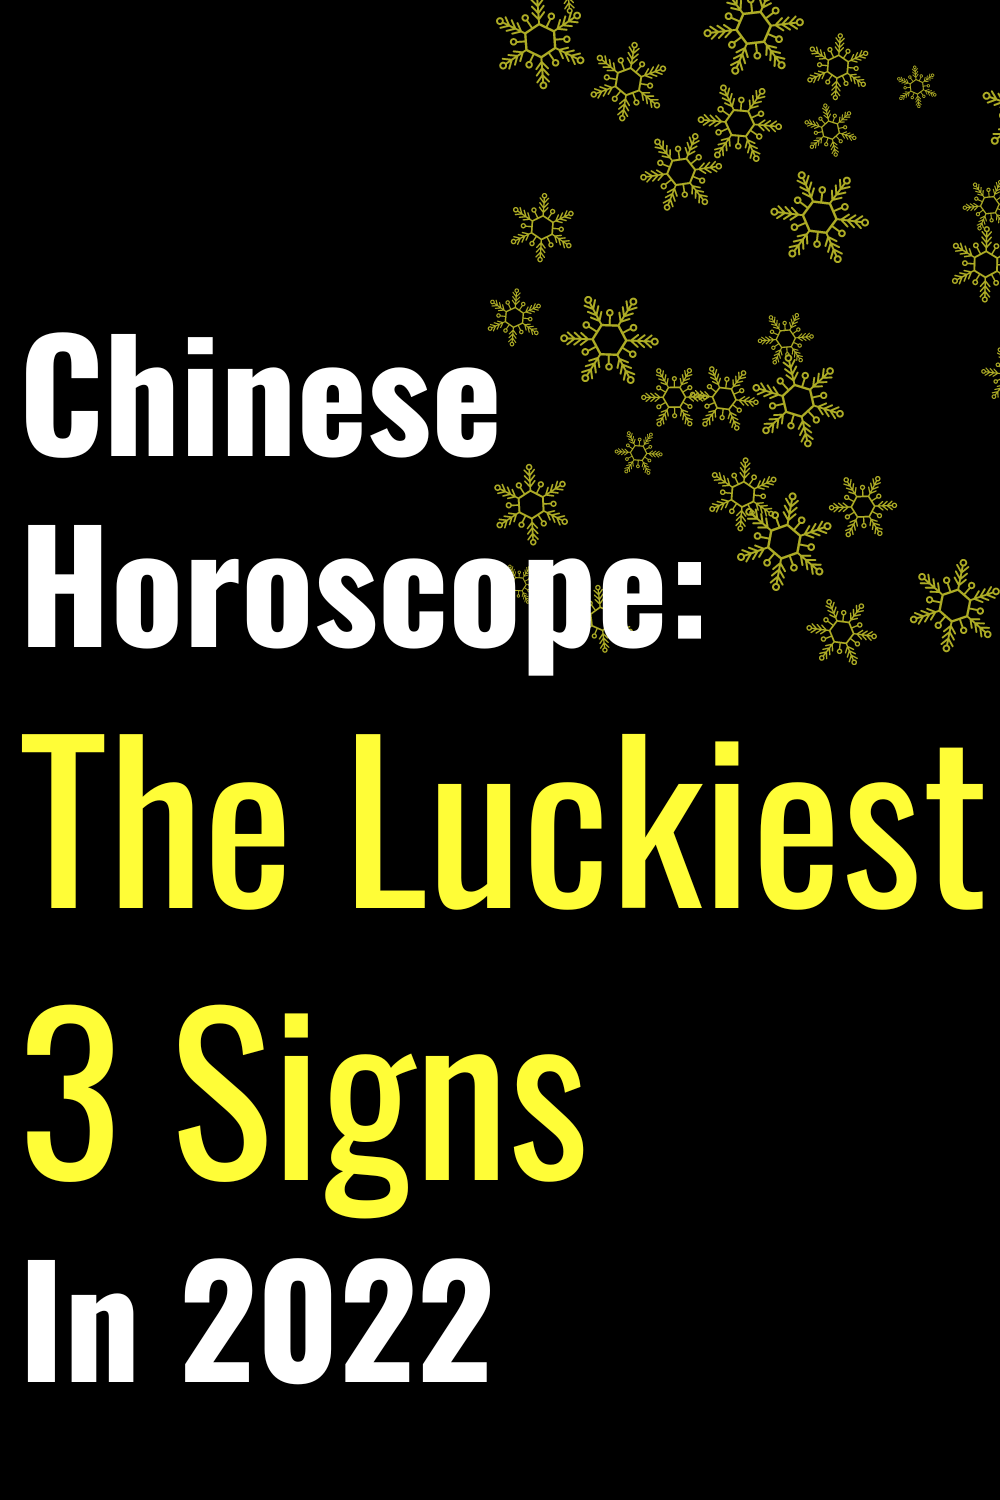 Chinese Horoscope: The Luckiest 3 Signs In 2022